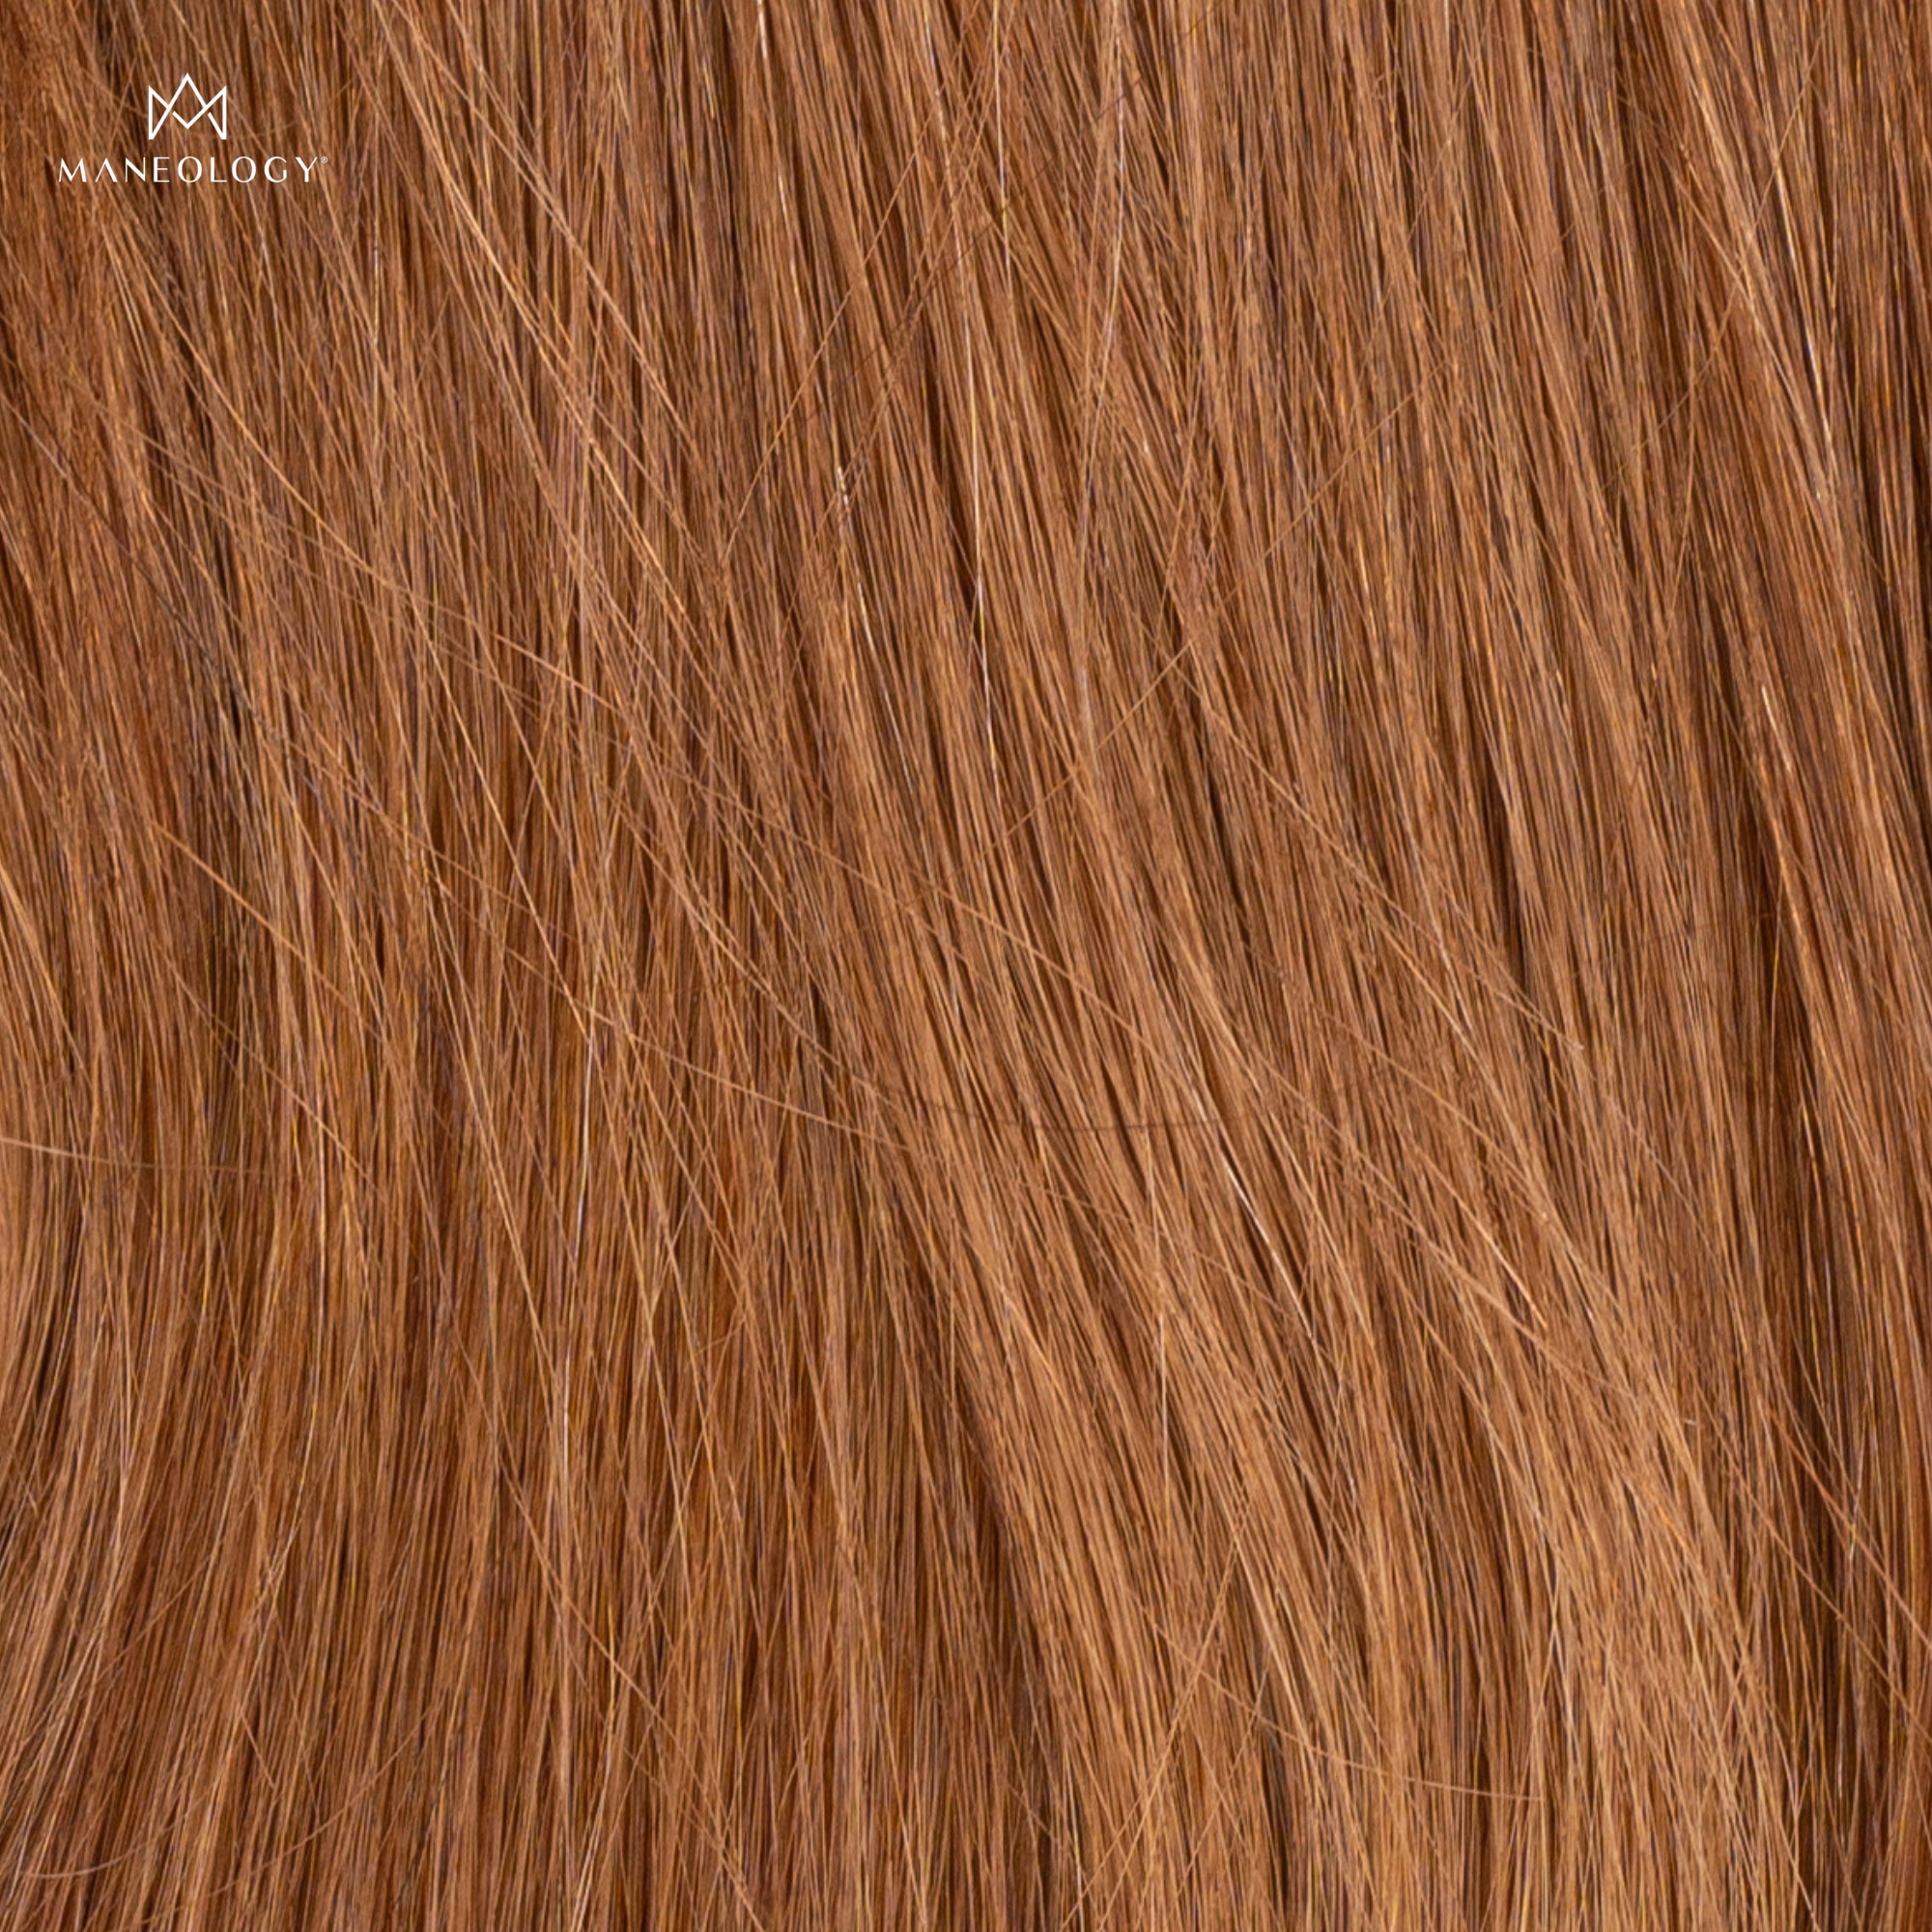 Duchess Elegant Clip-in Hair Extensions 16" Colour 5 Light Brown - Maneology Hair Extensions